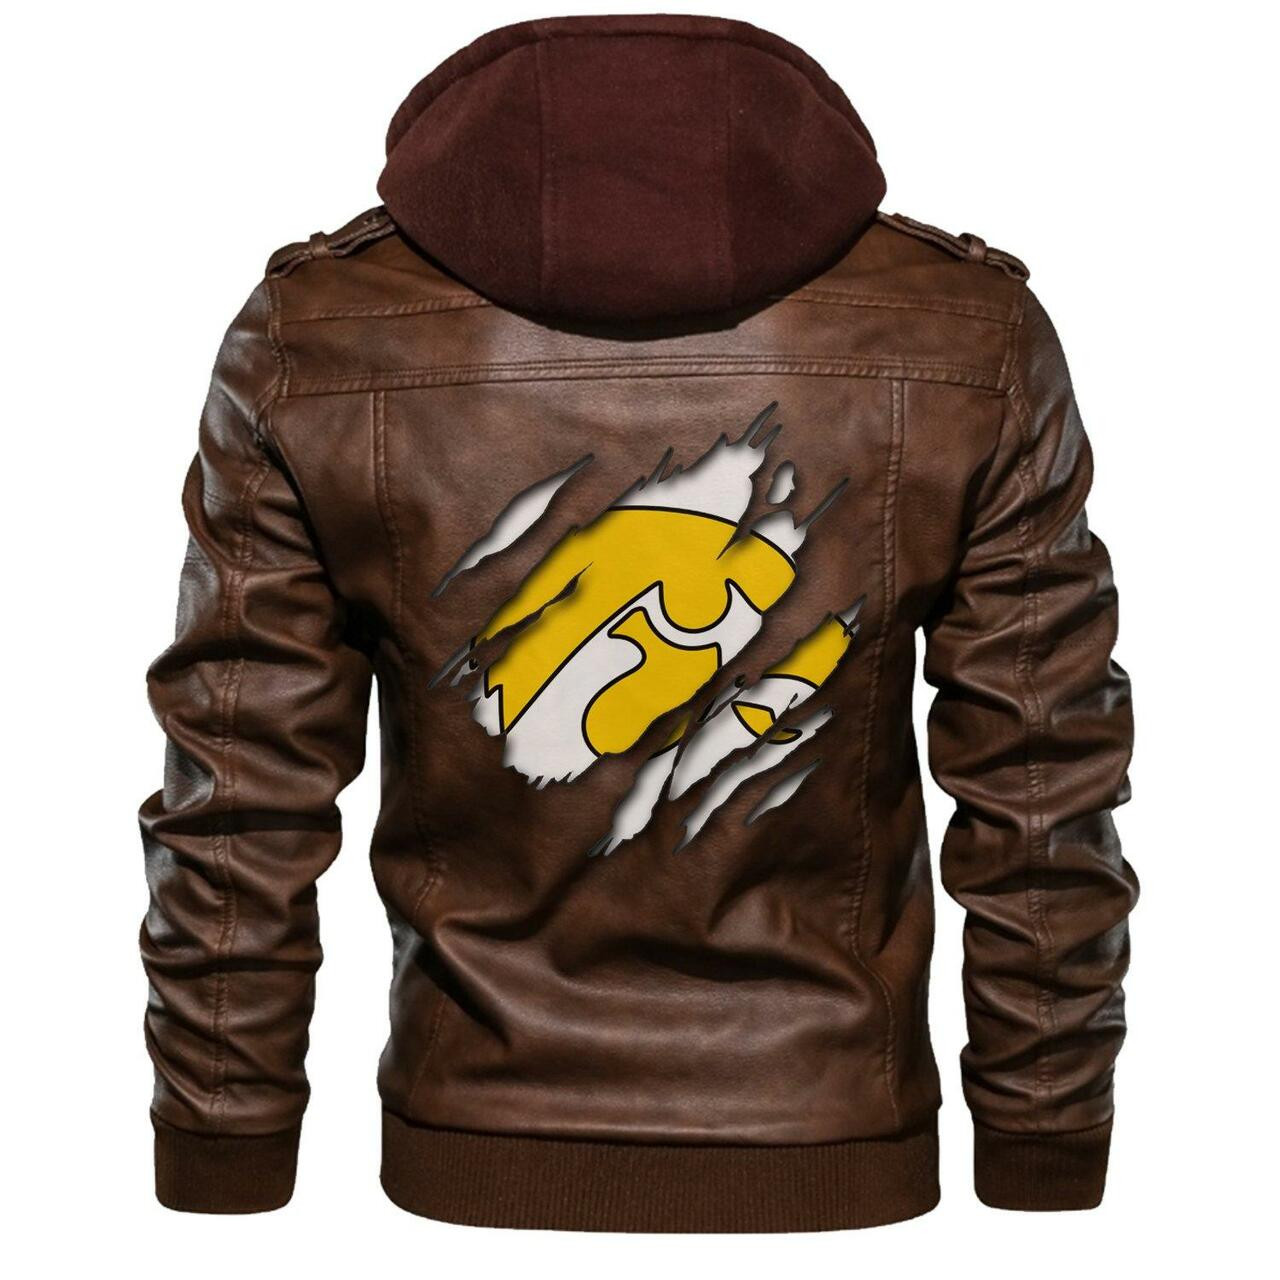 You can find a good leather jacket by access our website 107